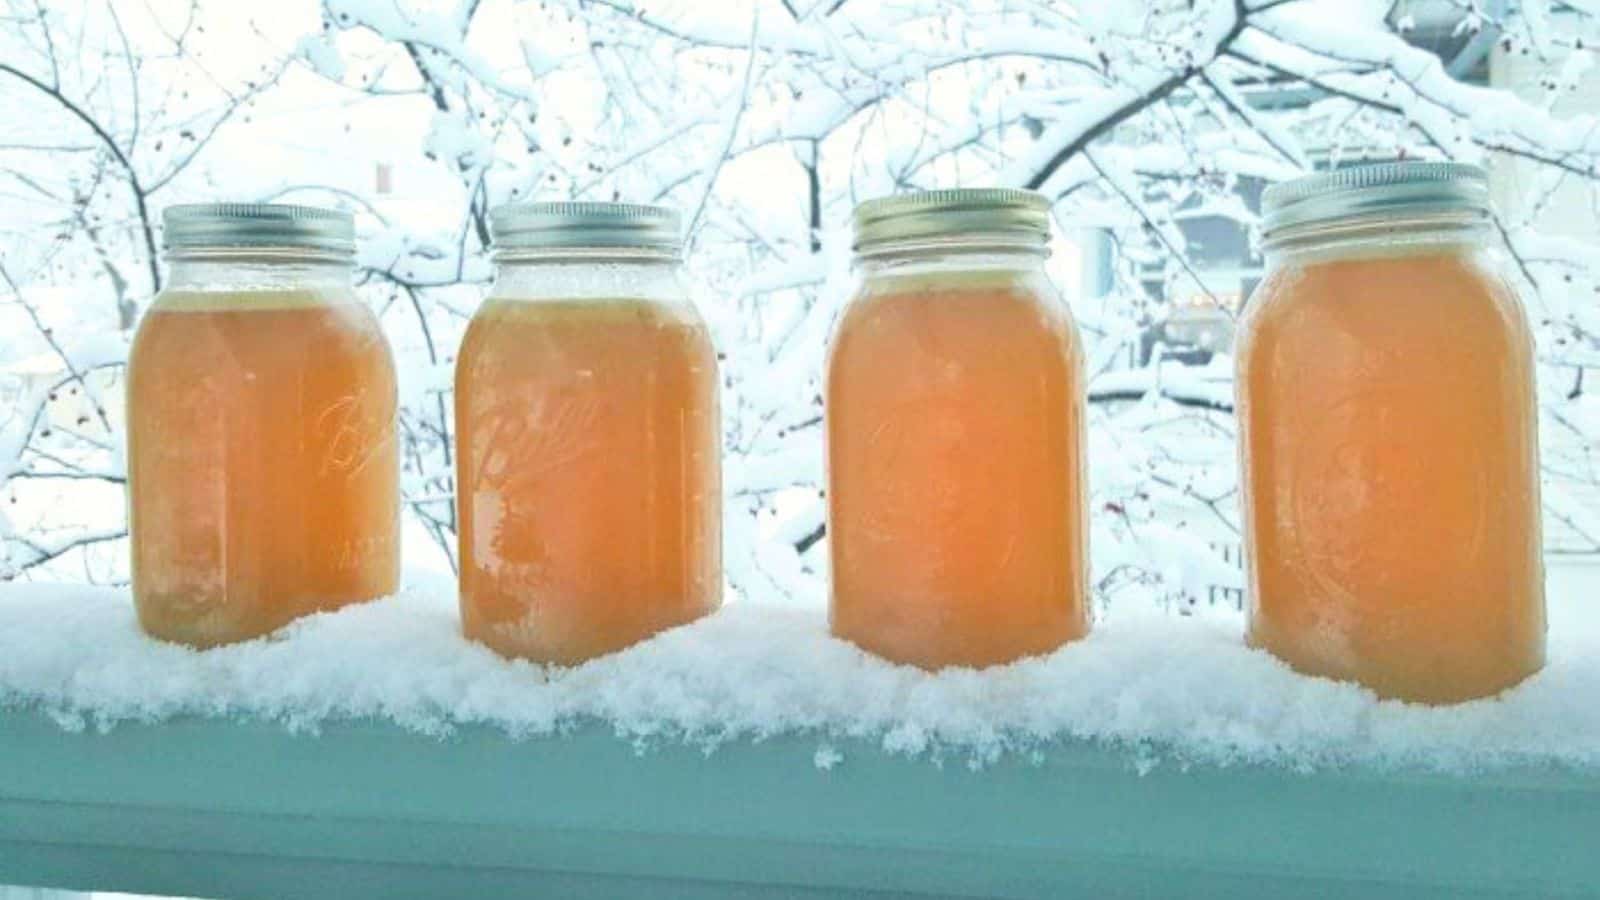 Image shows four mason jars of chicken stock sitting on a railing in the snow.